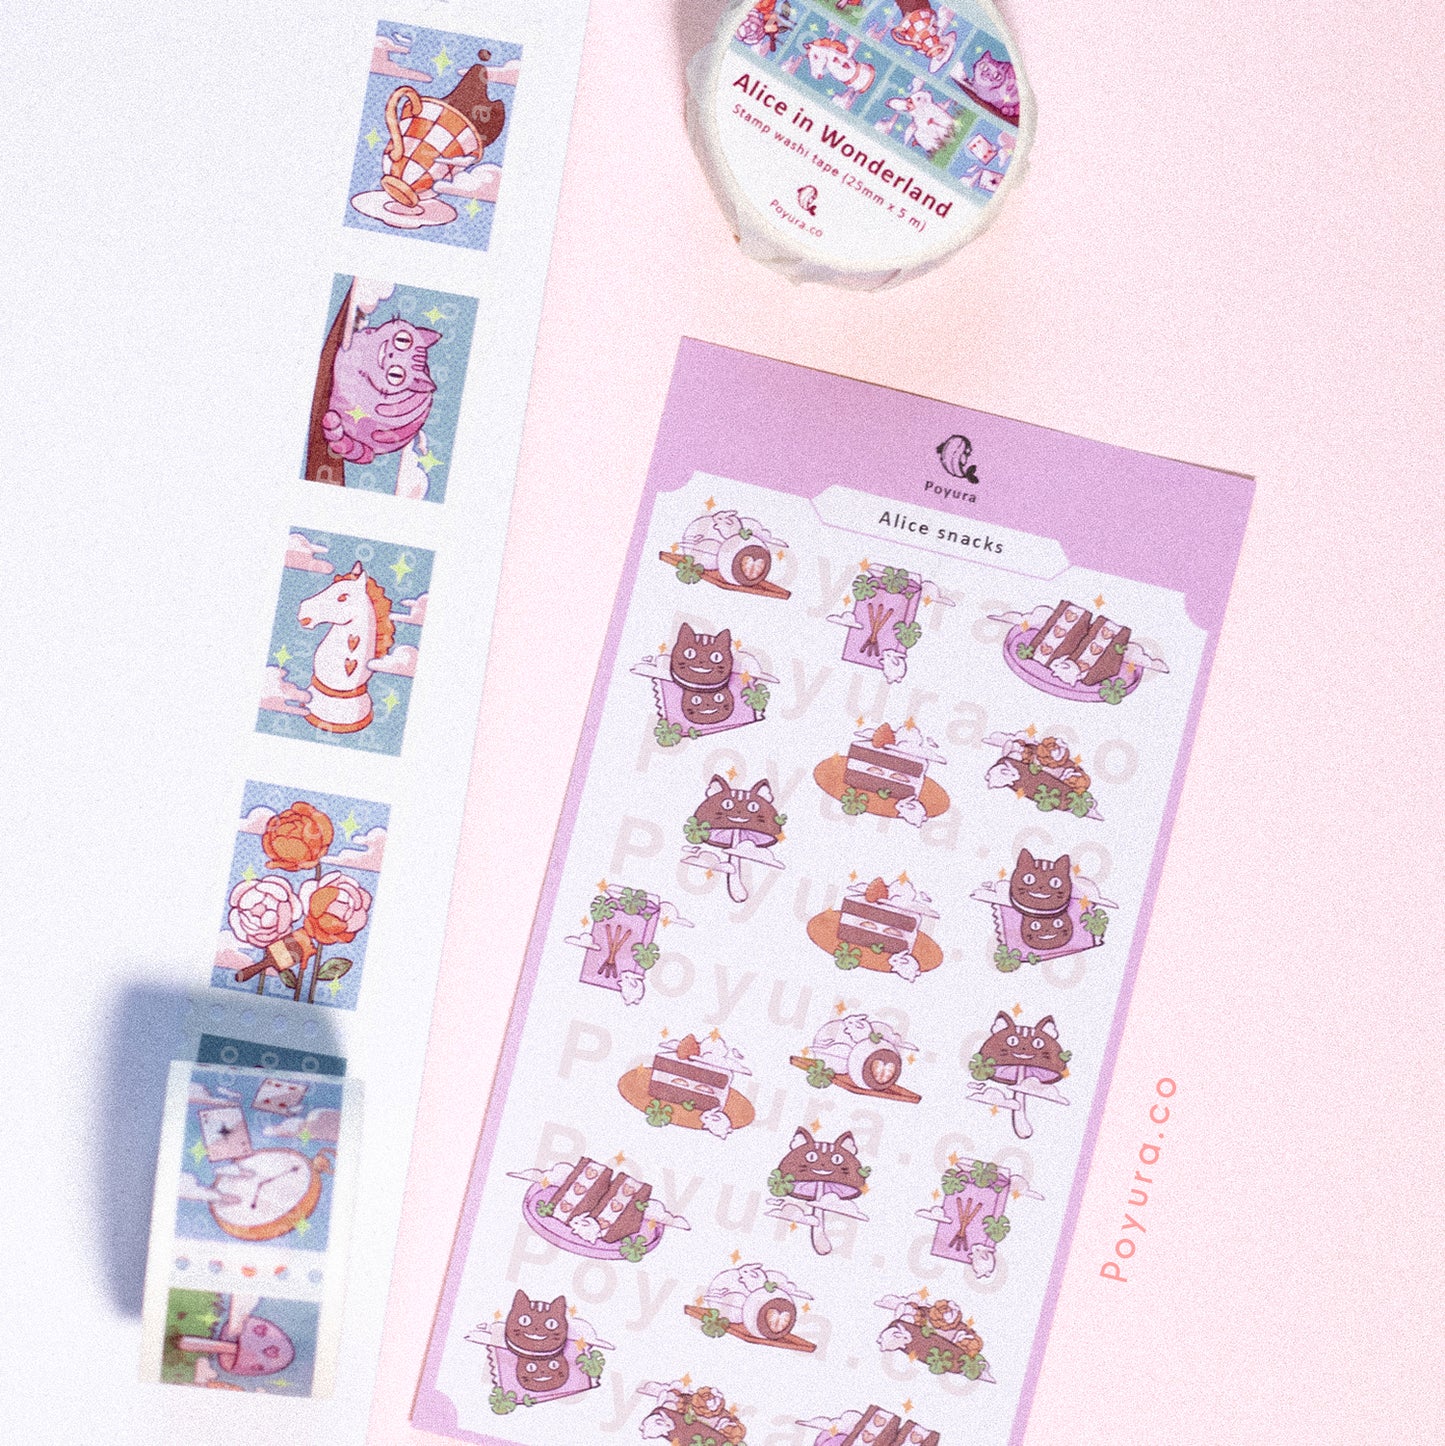 Alice in wonderland sticker sheet stamp washi tape bundle set Japanese Korean cute aesthetic stationery polco kpop journal toploader deco mad hatter cat bunny watch playing card rose flower chess queen of heart high tea party mushroom blue